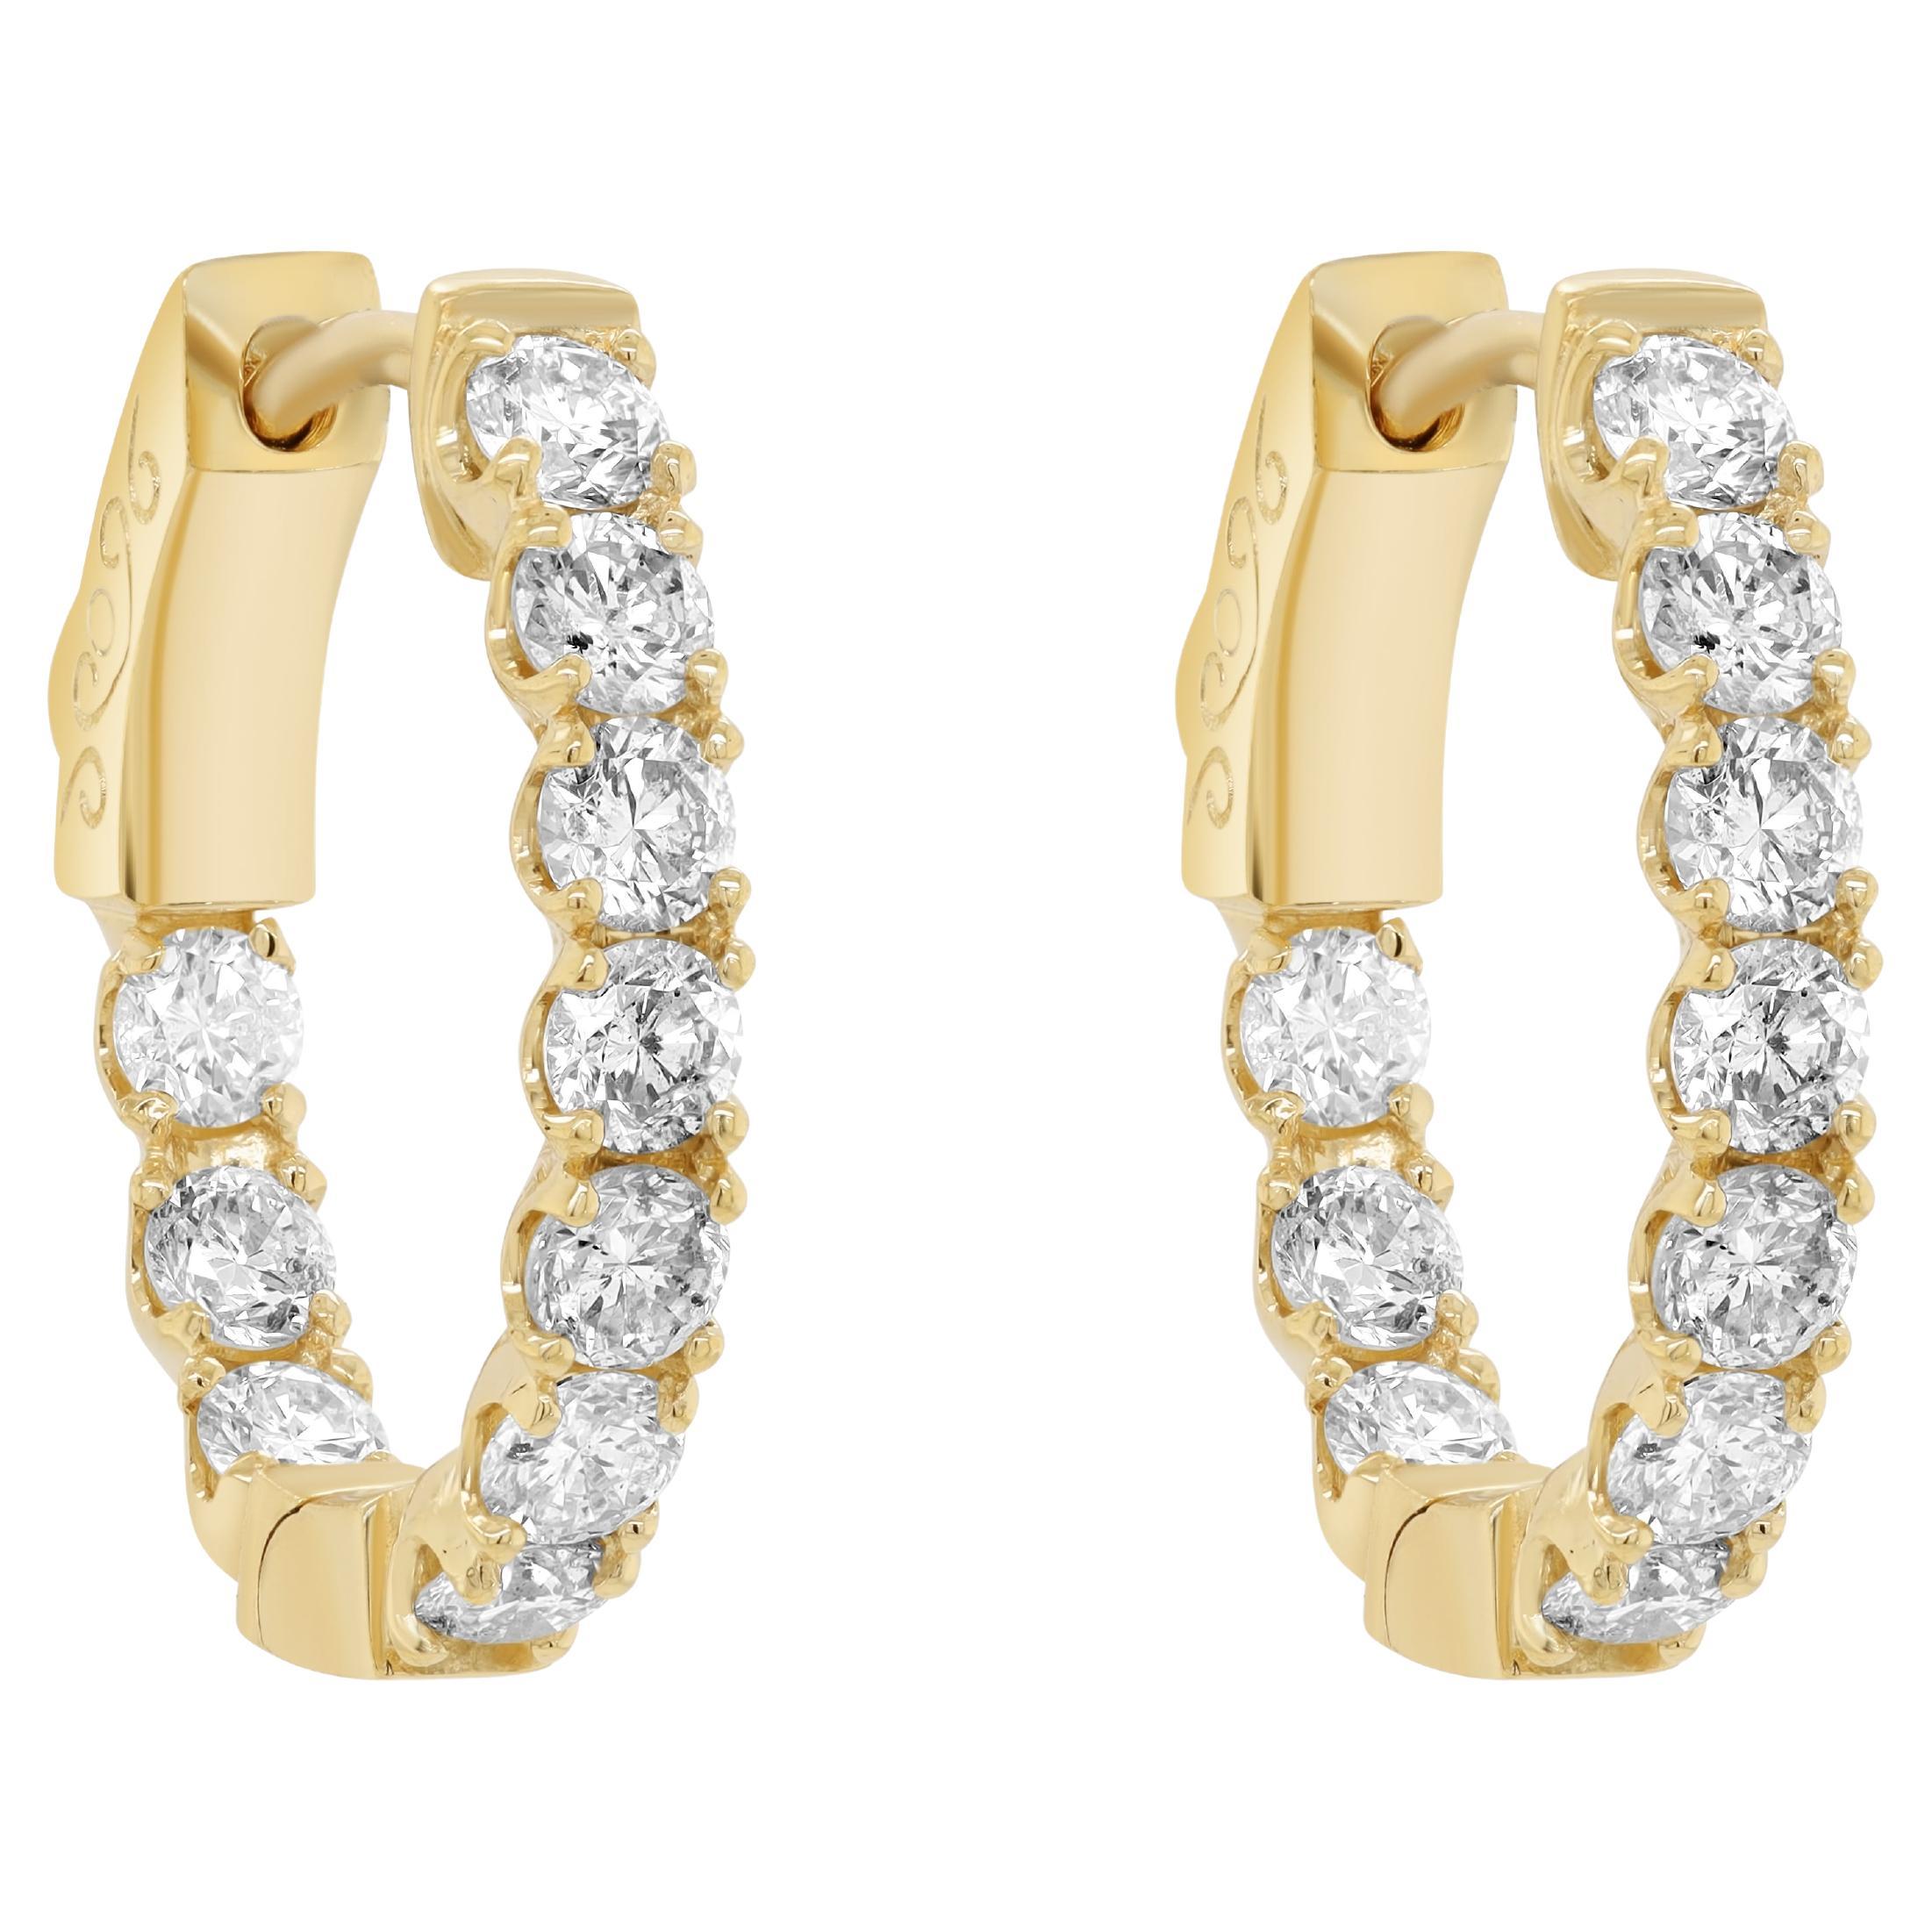 Diana M. 14KT YELLOW GOLD, DIAMOND OVAL HOOPS FEATURES 1.65cts OF DIAMONDS.  For Sale